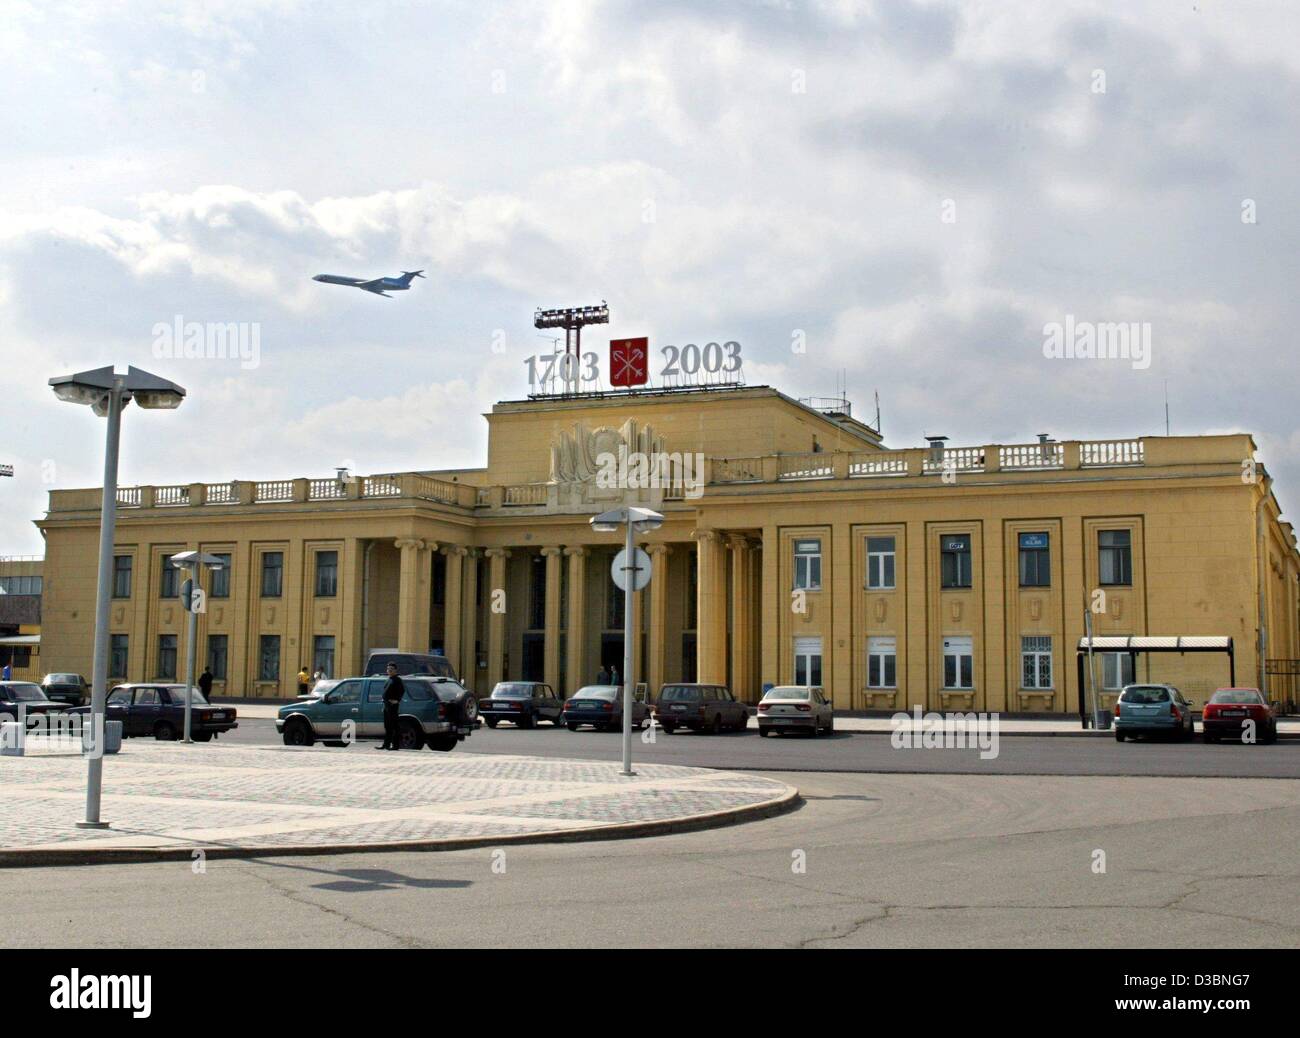 (dpa) - The years '1703-2003' advertise the city's 300th anniversary at the international airport in St. Petersburg, Russia, 13 May 2003. Stock Photo